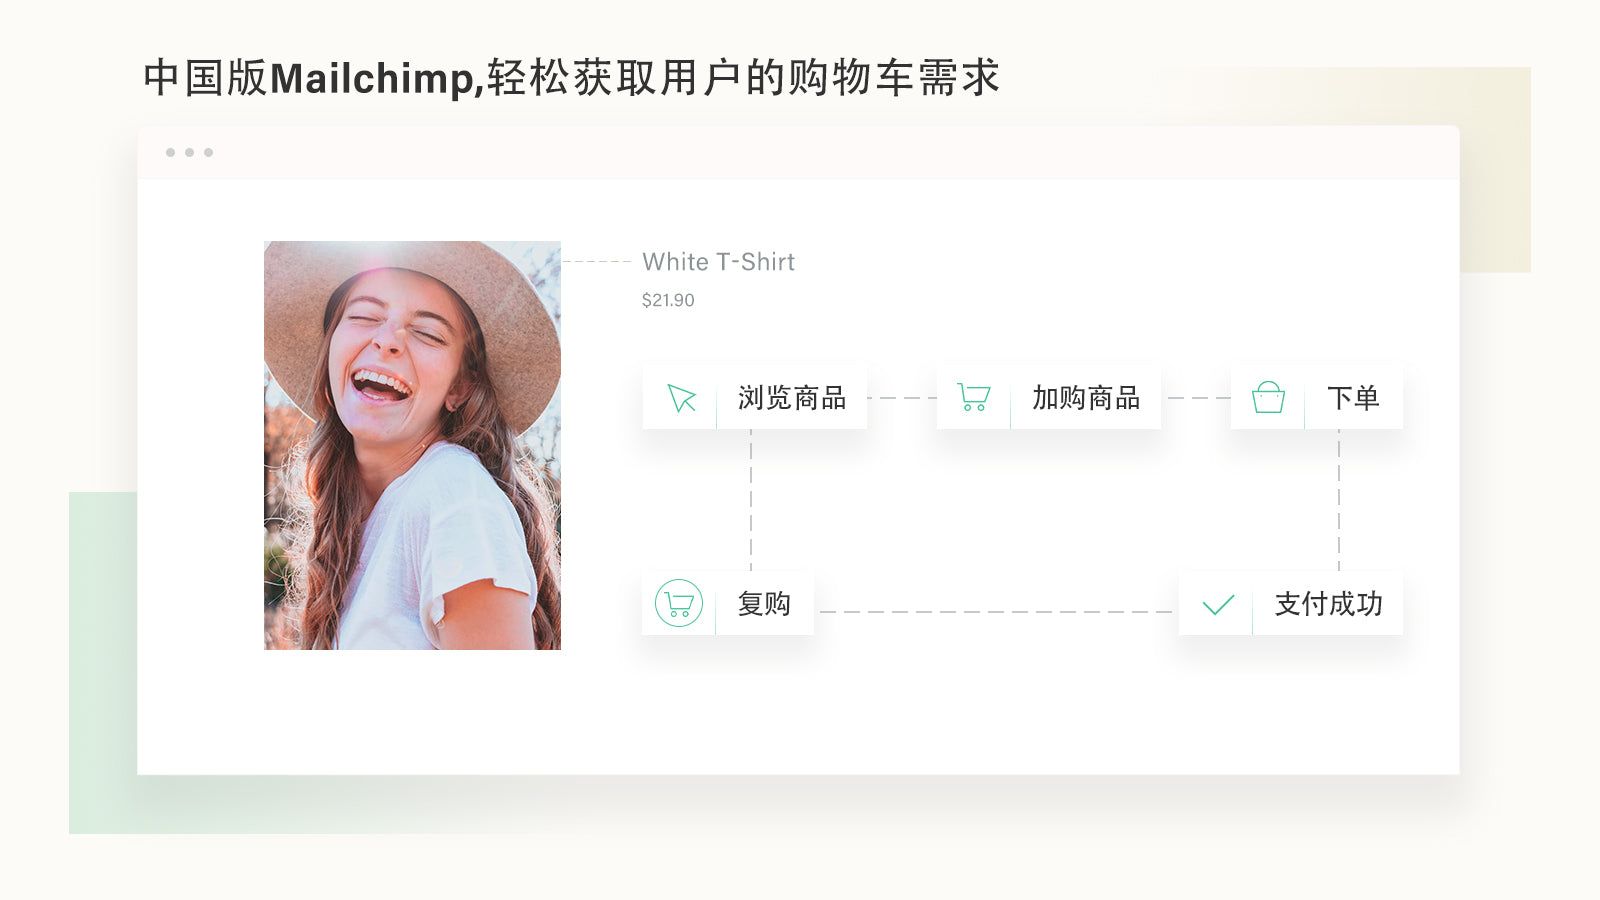 The Chinese version of MailChimp, making email marketing easy.